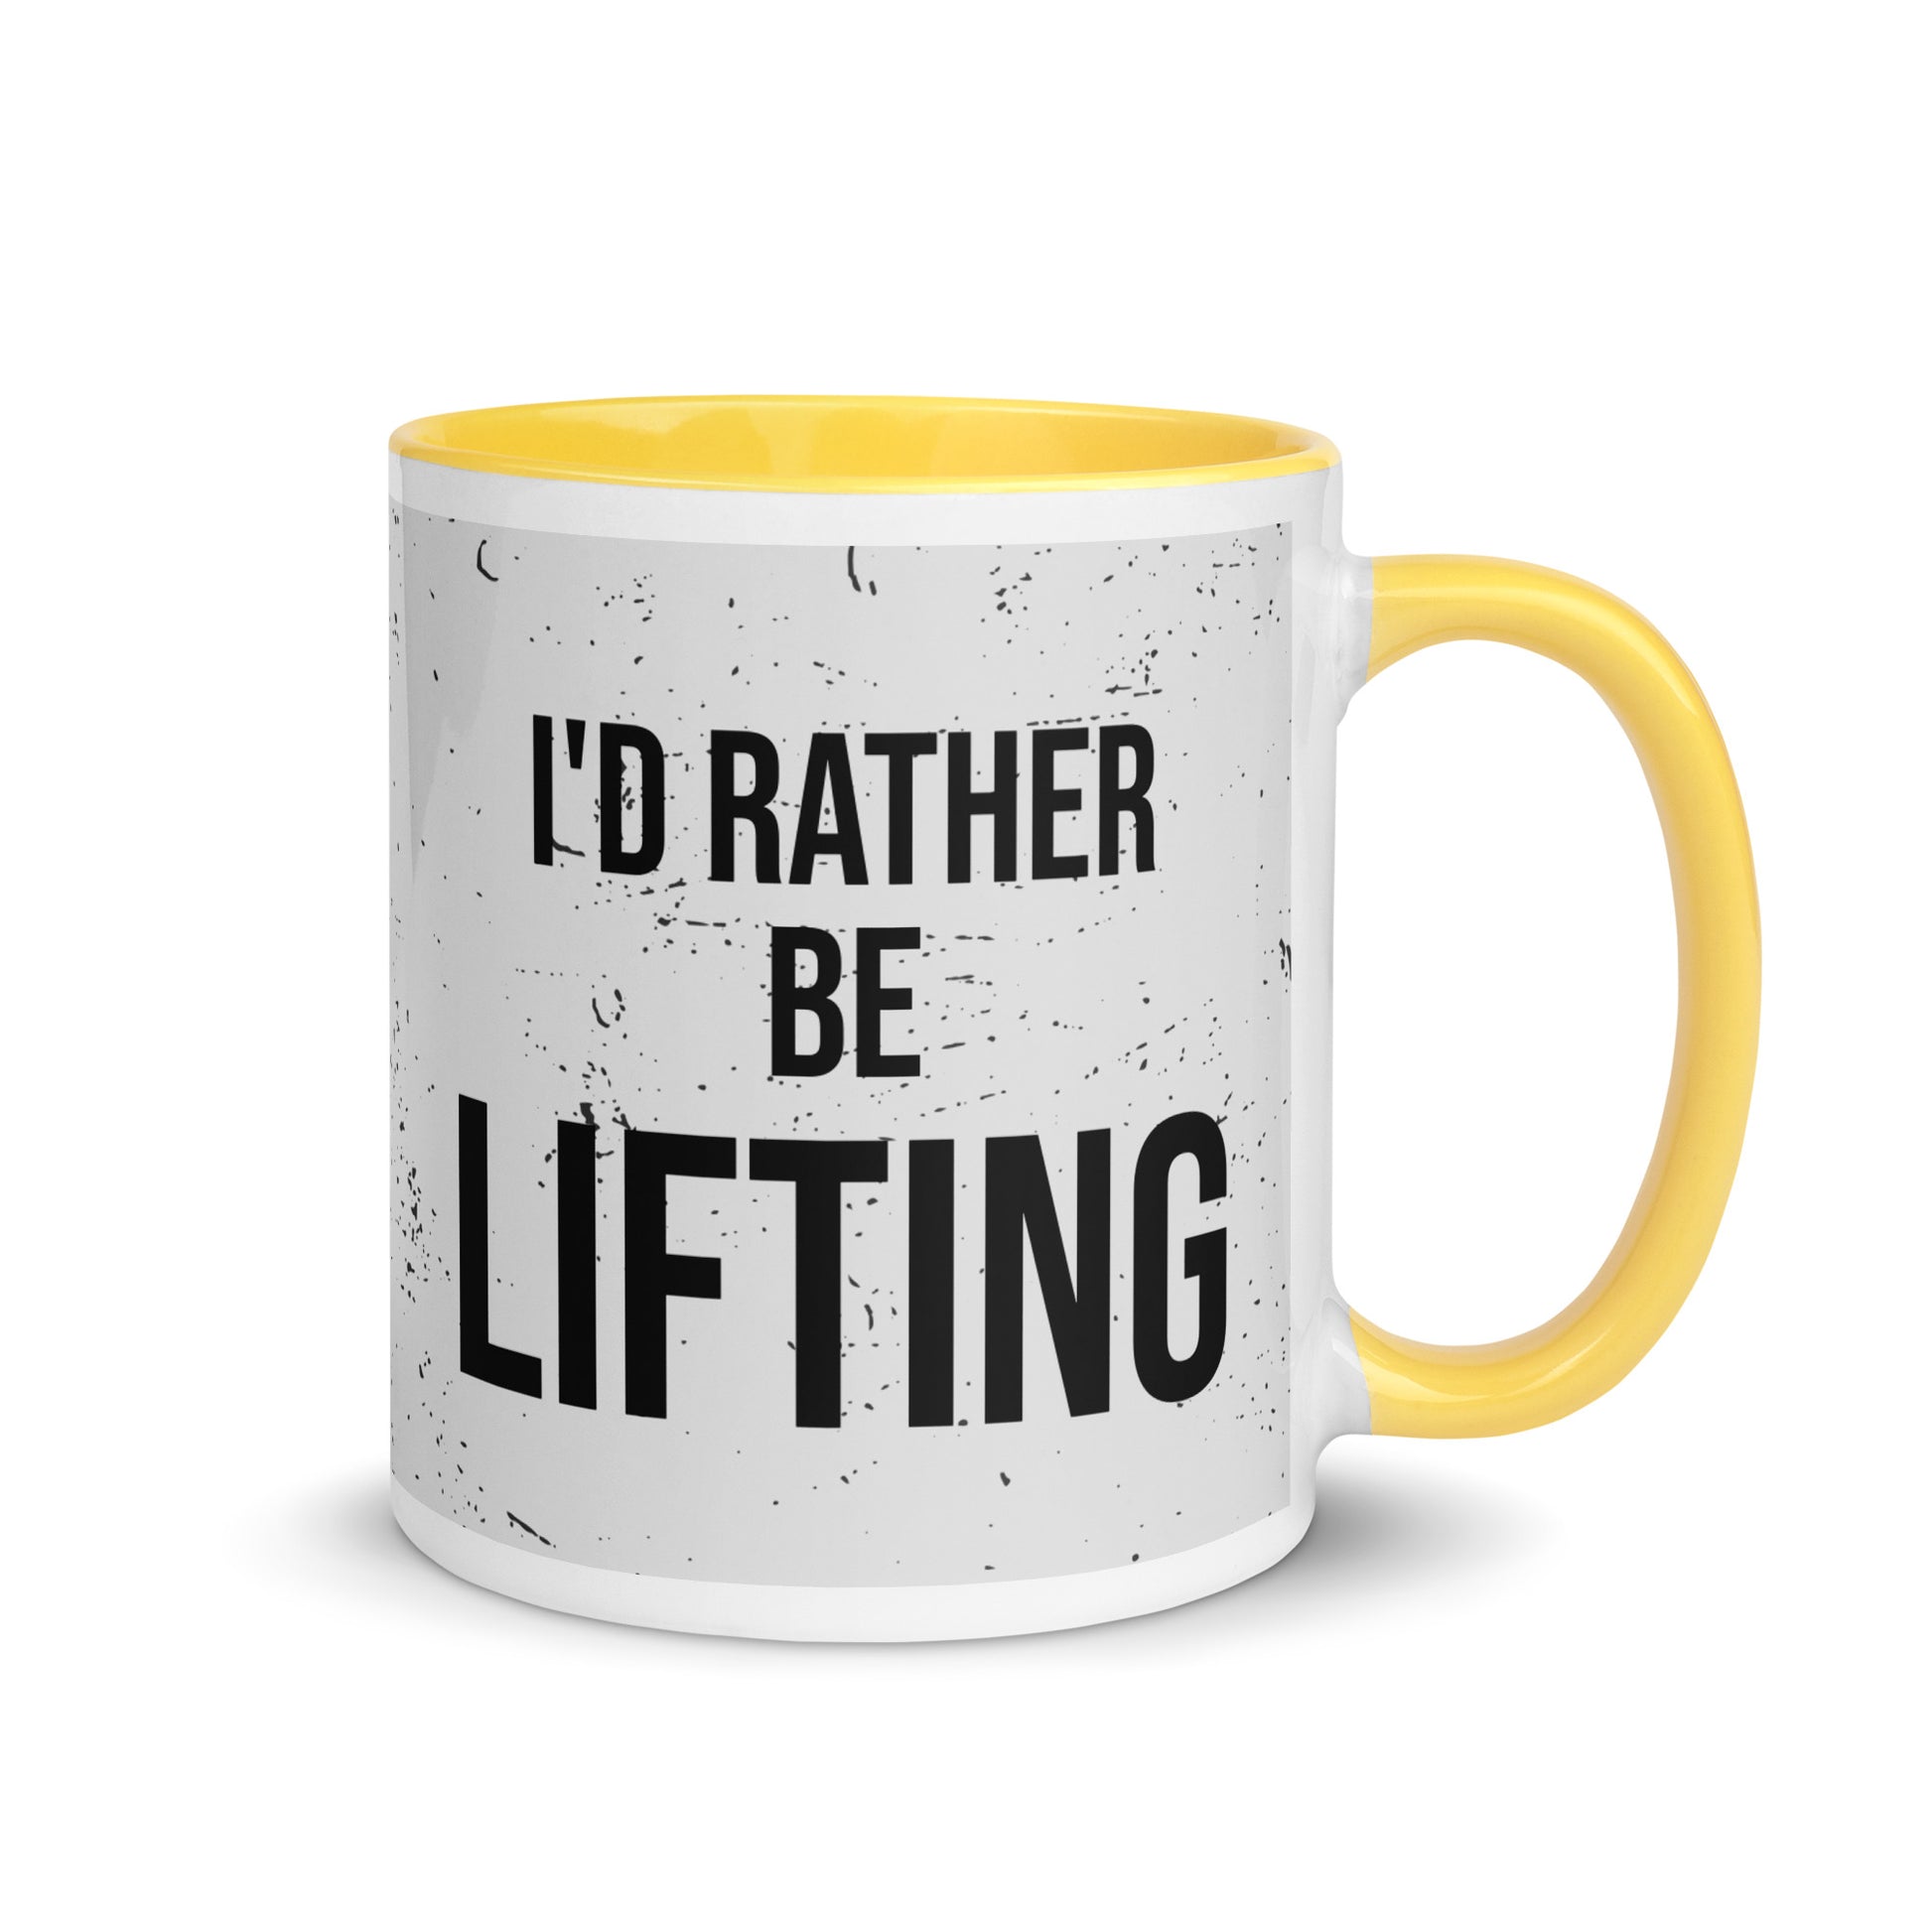 Yellow handled mug with I'd rather be lifting written on it, across a grey splatter background. A gift for someone who loves the gym.